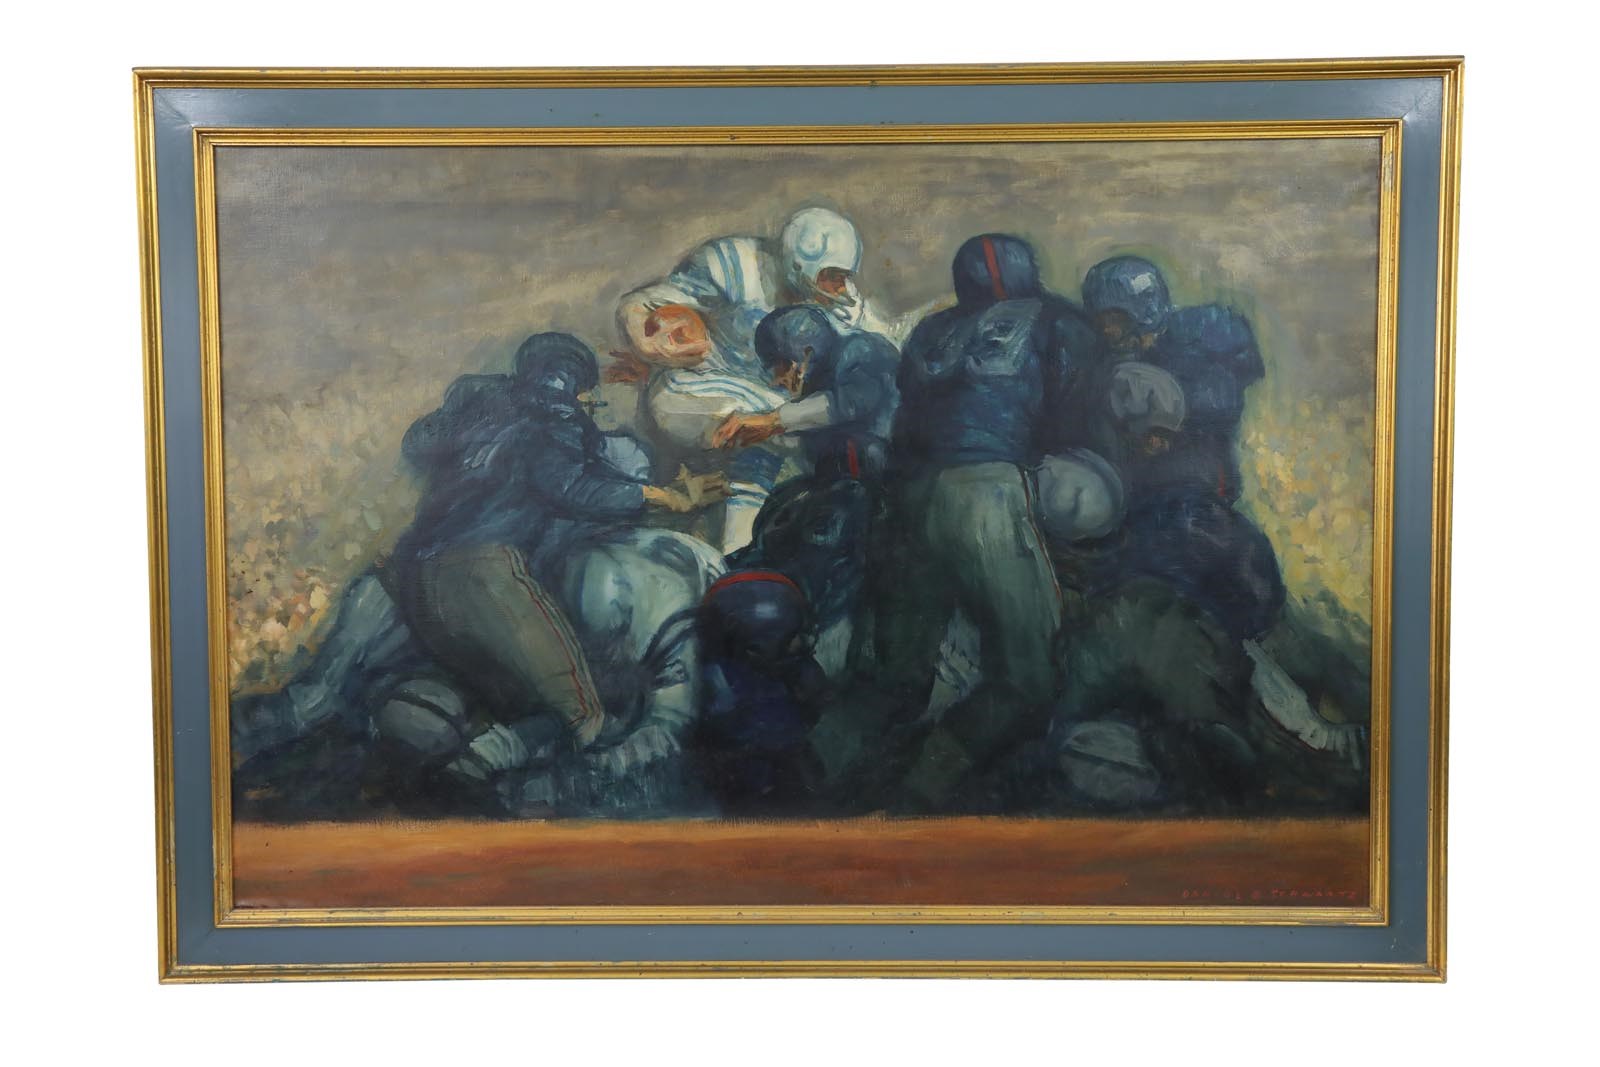 - 1958 "Greatest Game Ever Played" Oil on Canvas by Daniel Schwartz - Published in 1960 Esquire